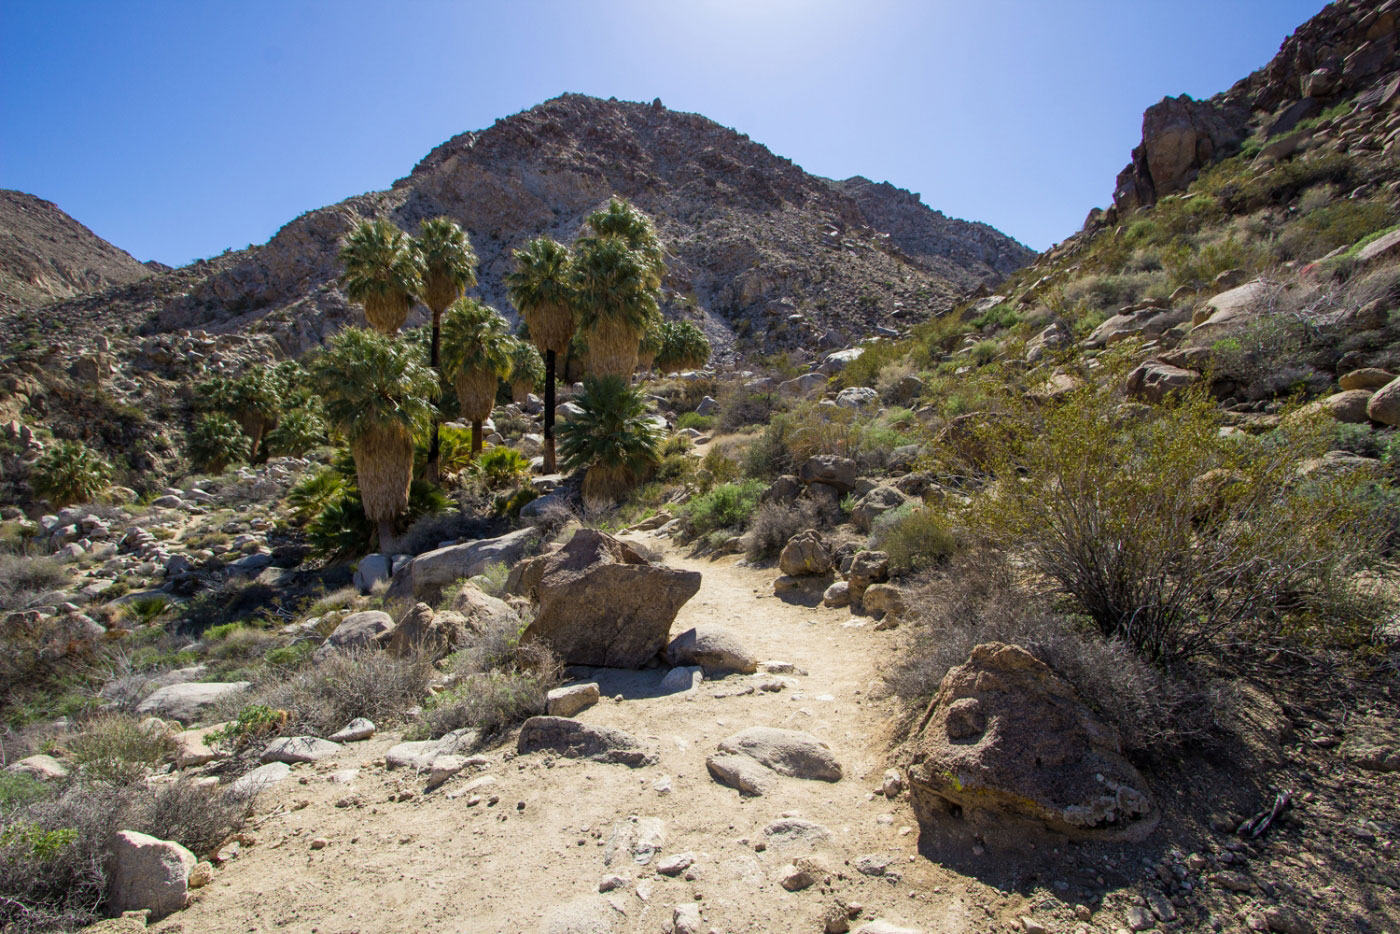 Hike 49 Palms Oasis and Canyon Loop in Joshua Tree National Park, California - Stav is Lost